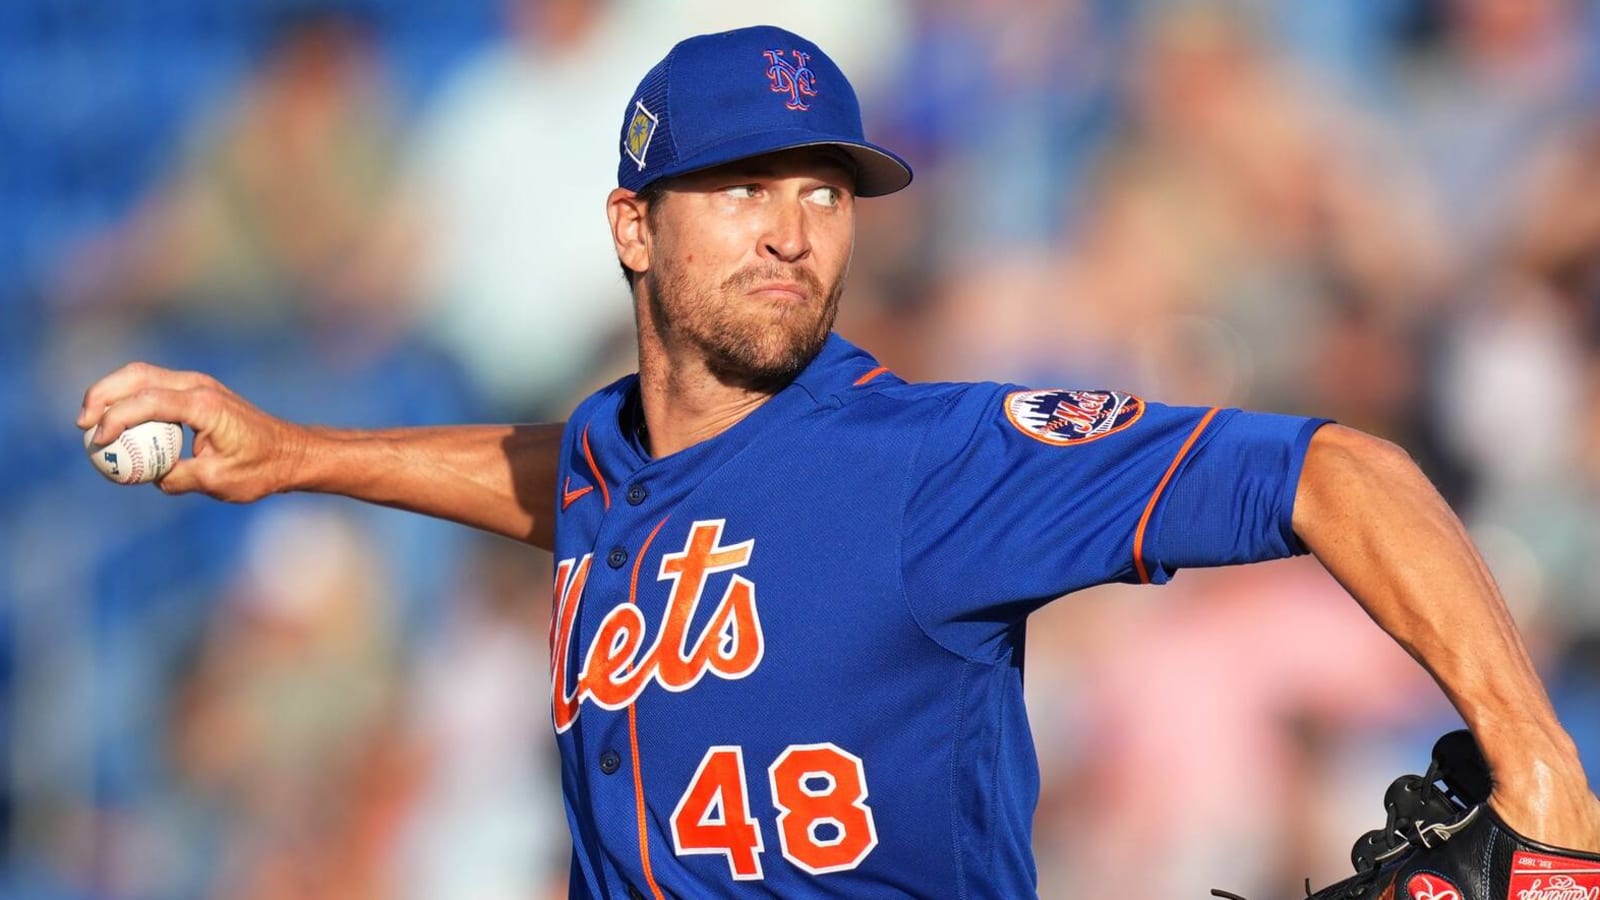 Mets ace Jacob deGrom roughed up in potential final rehab start